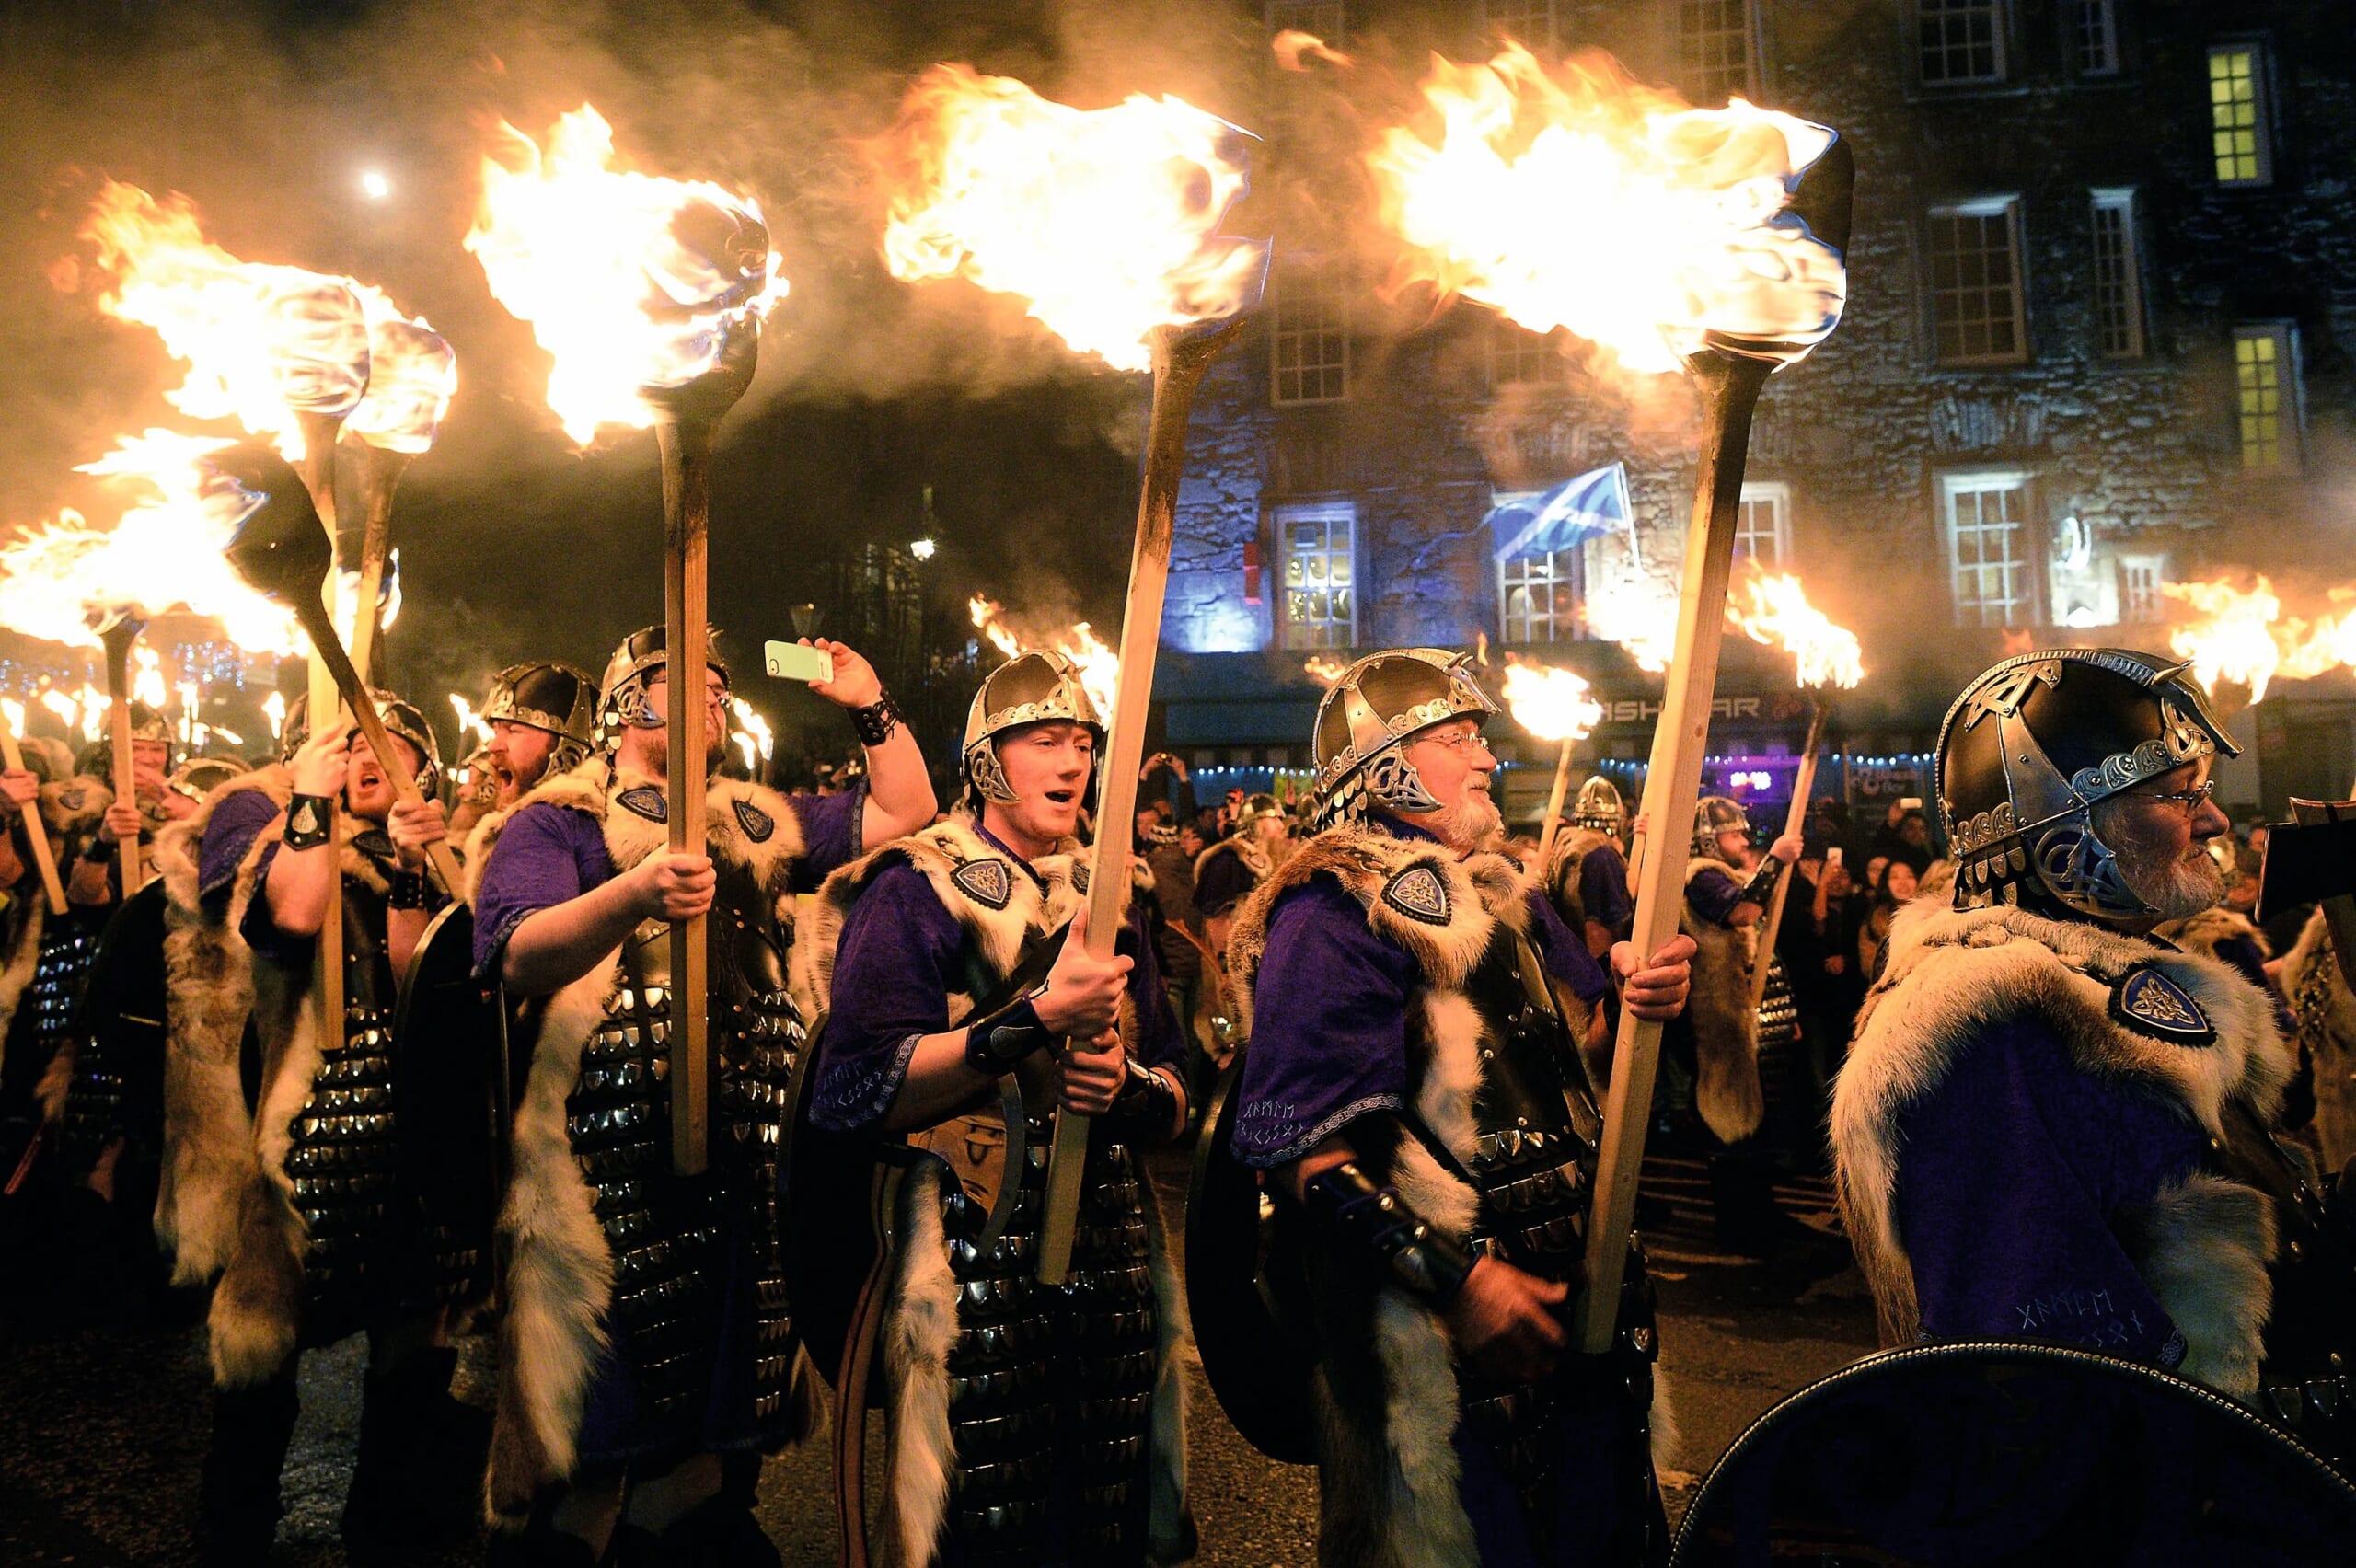 Guide to Hogmanay--history and how to celebrate Scotland's New Year's Eve - Countryfile.com